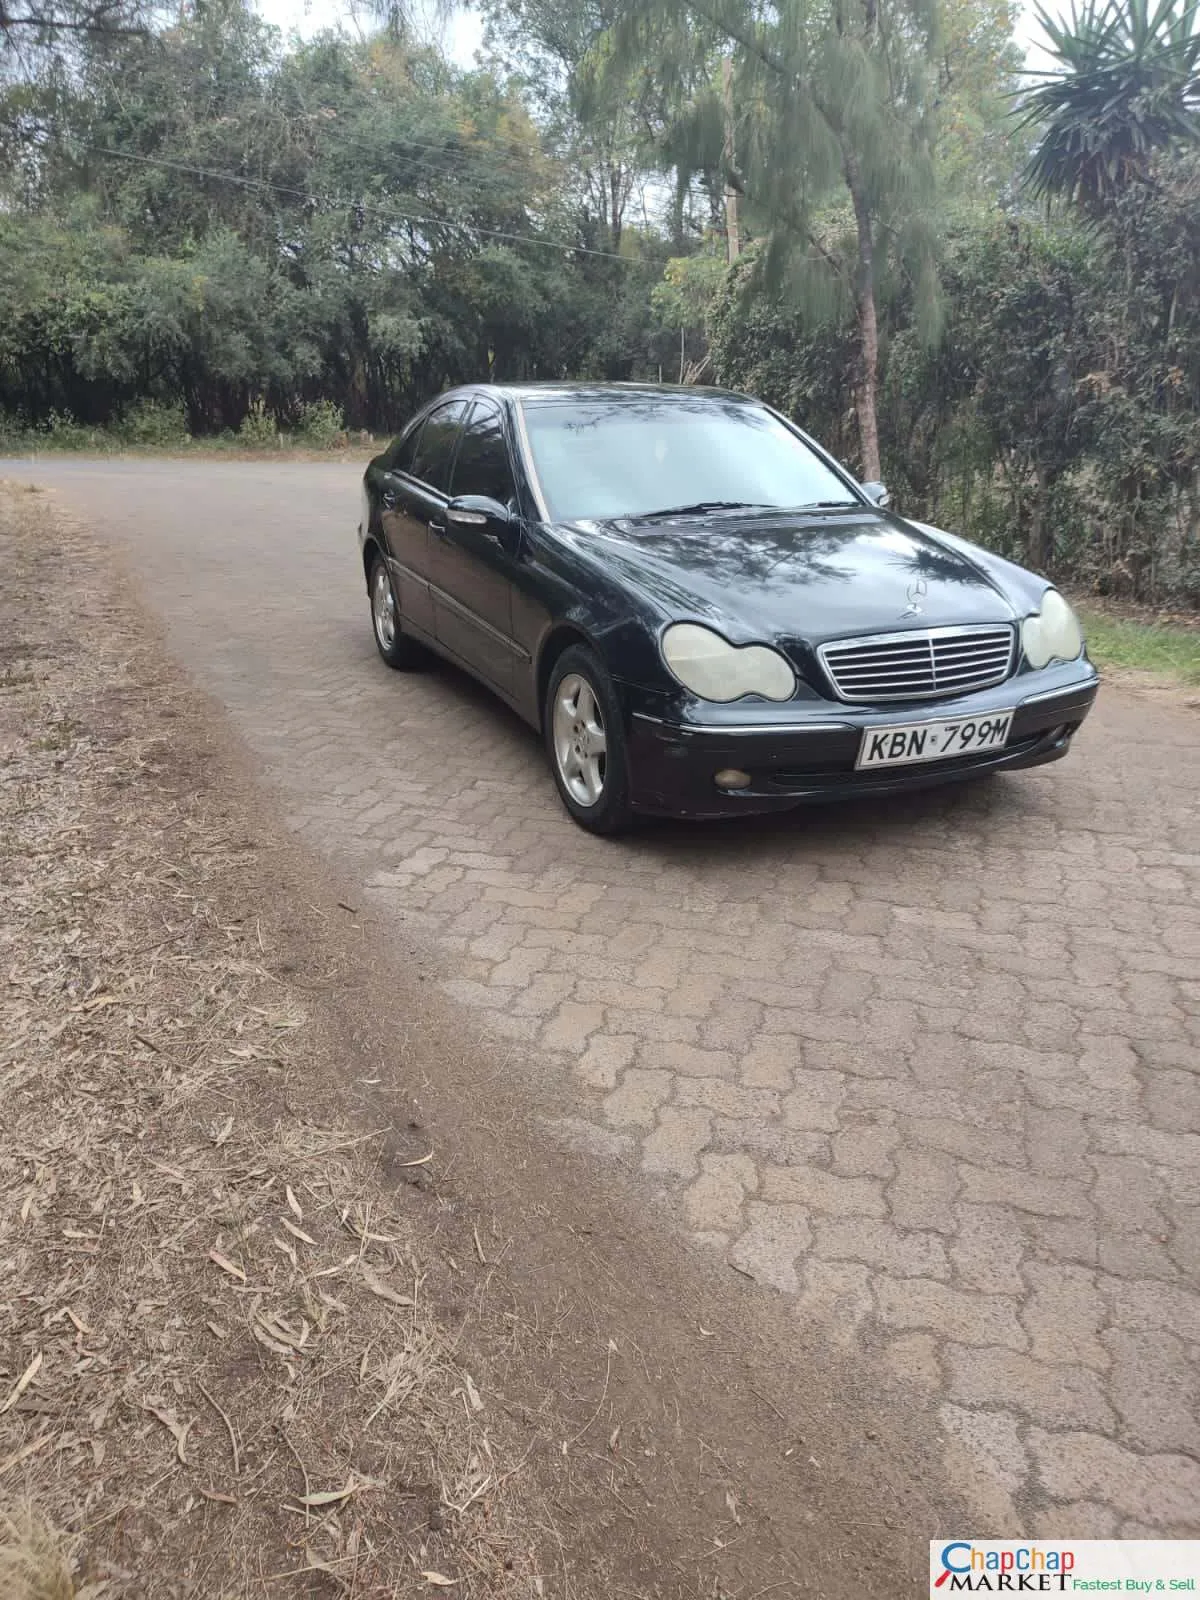 Cars Cars For Sale-Mercedes Benz C200 for sale in Kenya QUICK SALE 🔥 You Pay 30% DEPOSIT Trade in OK EXCLUSIVE HIRE PURCHASE INSTALLMENTS 9